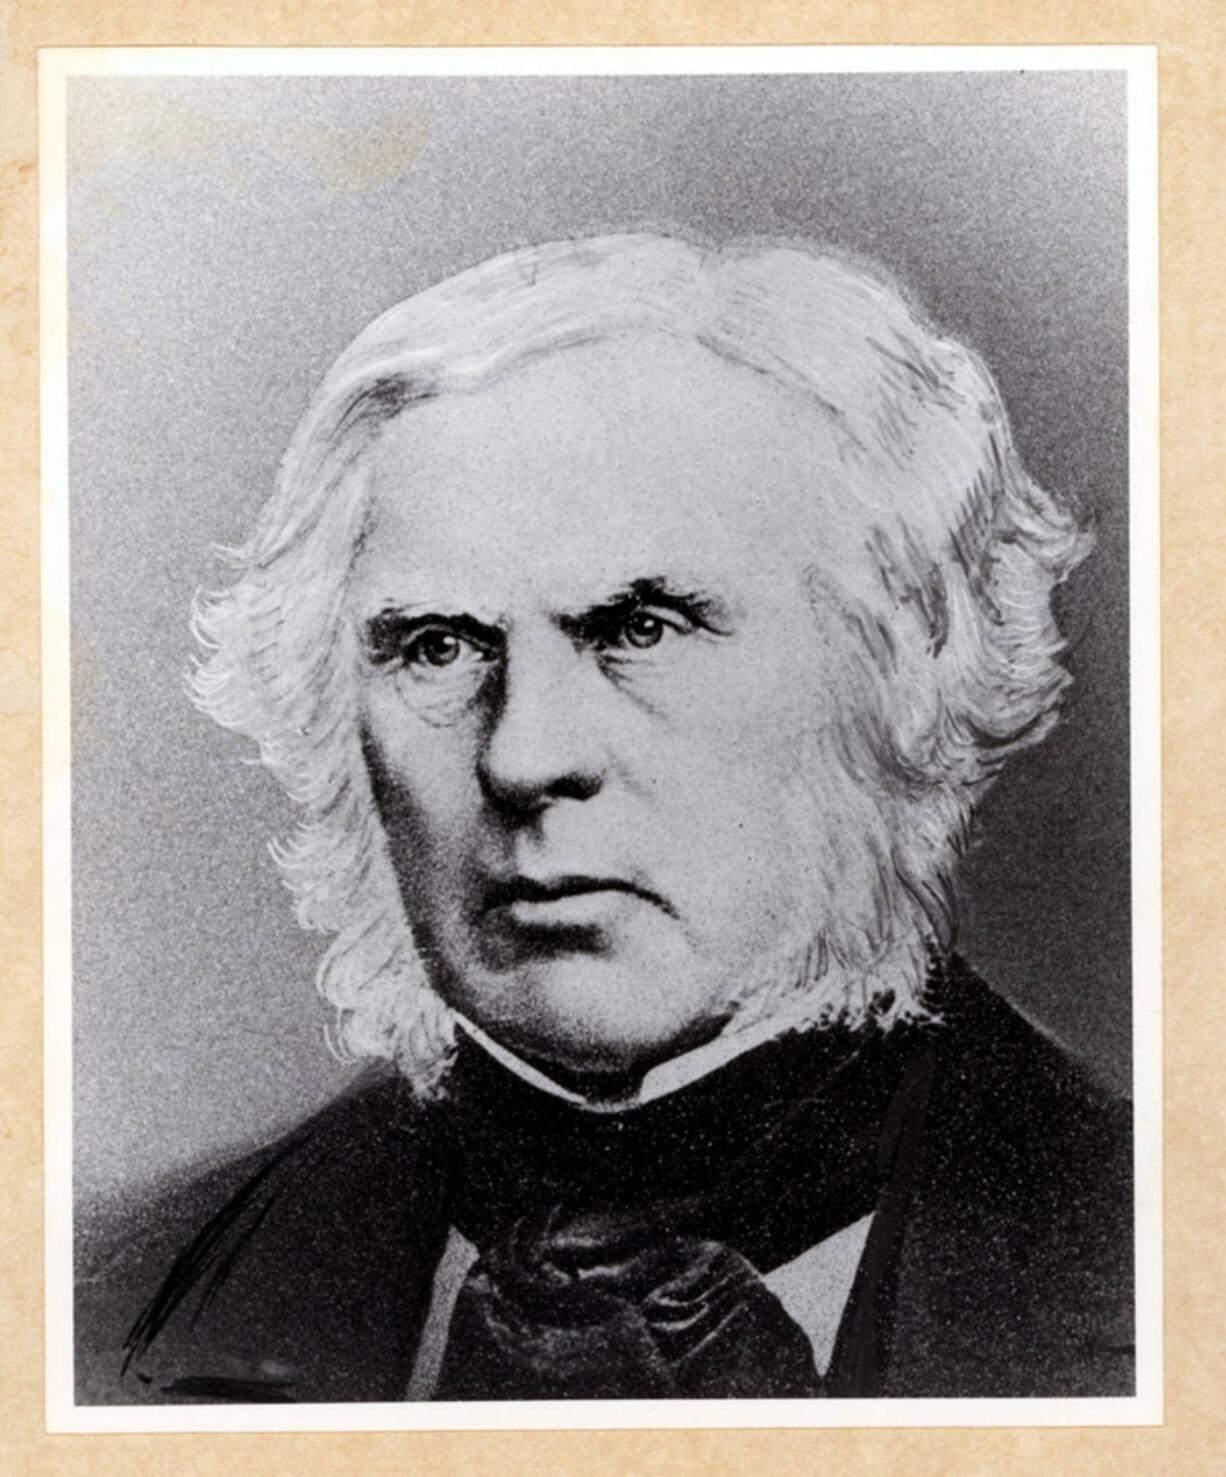 John McLoughlin, chief factor of Hudson Bay Company’s Columbia Department, managed his territory like a despot. He met opposing opinions with a violent temper and dealt out severe punishments he felt were needed to keep his far-flung area in line. Yet he had a good relationship with the Indigenous peoples.